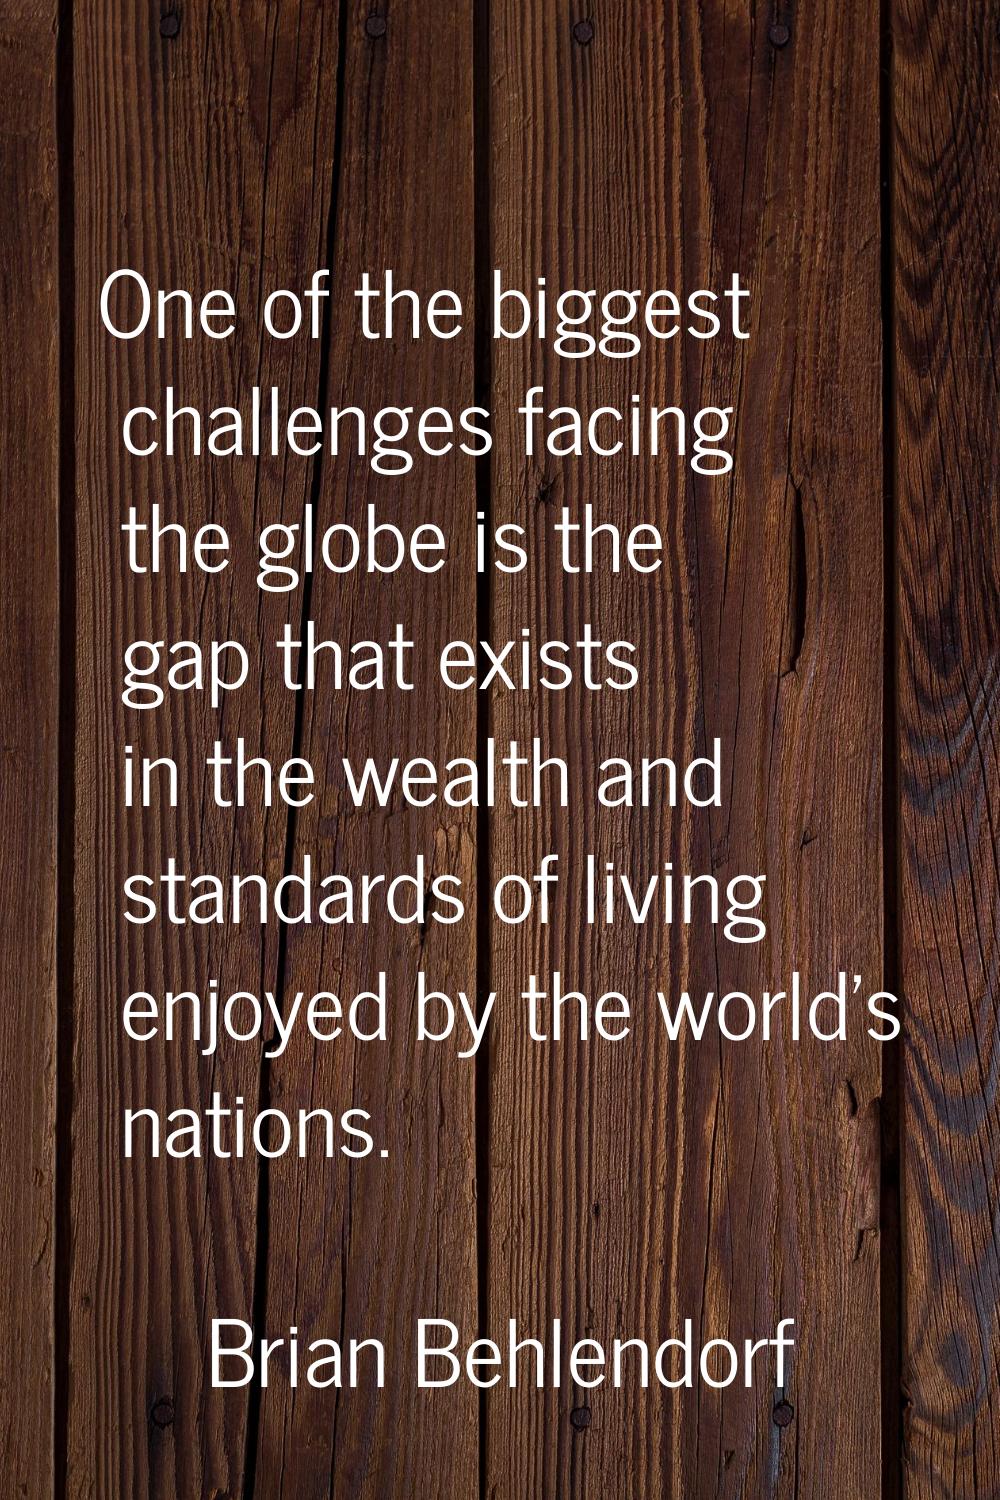 One of the biggest challenges facing the globe is the gap that exists in the wealth and standards o